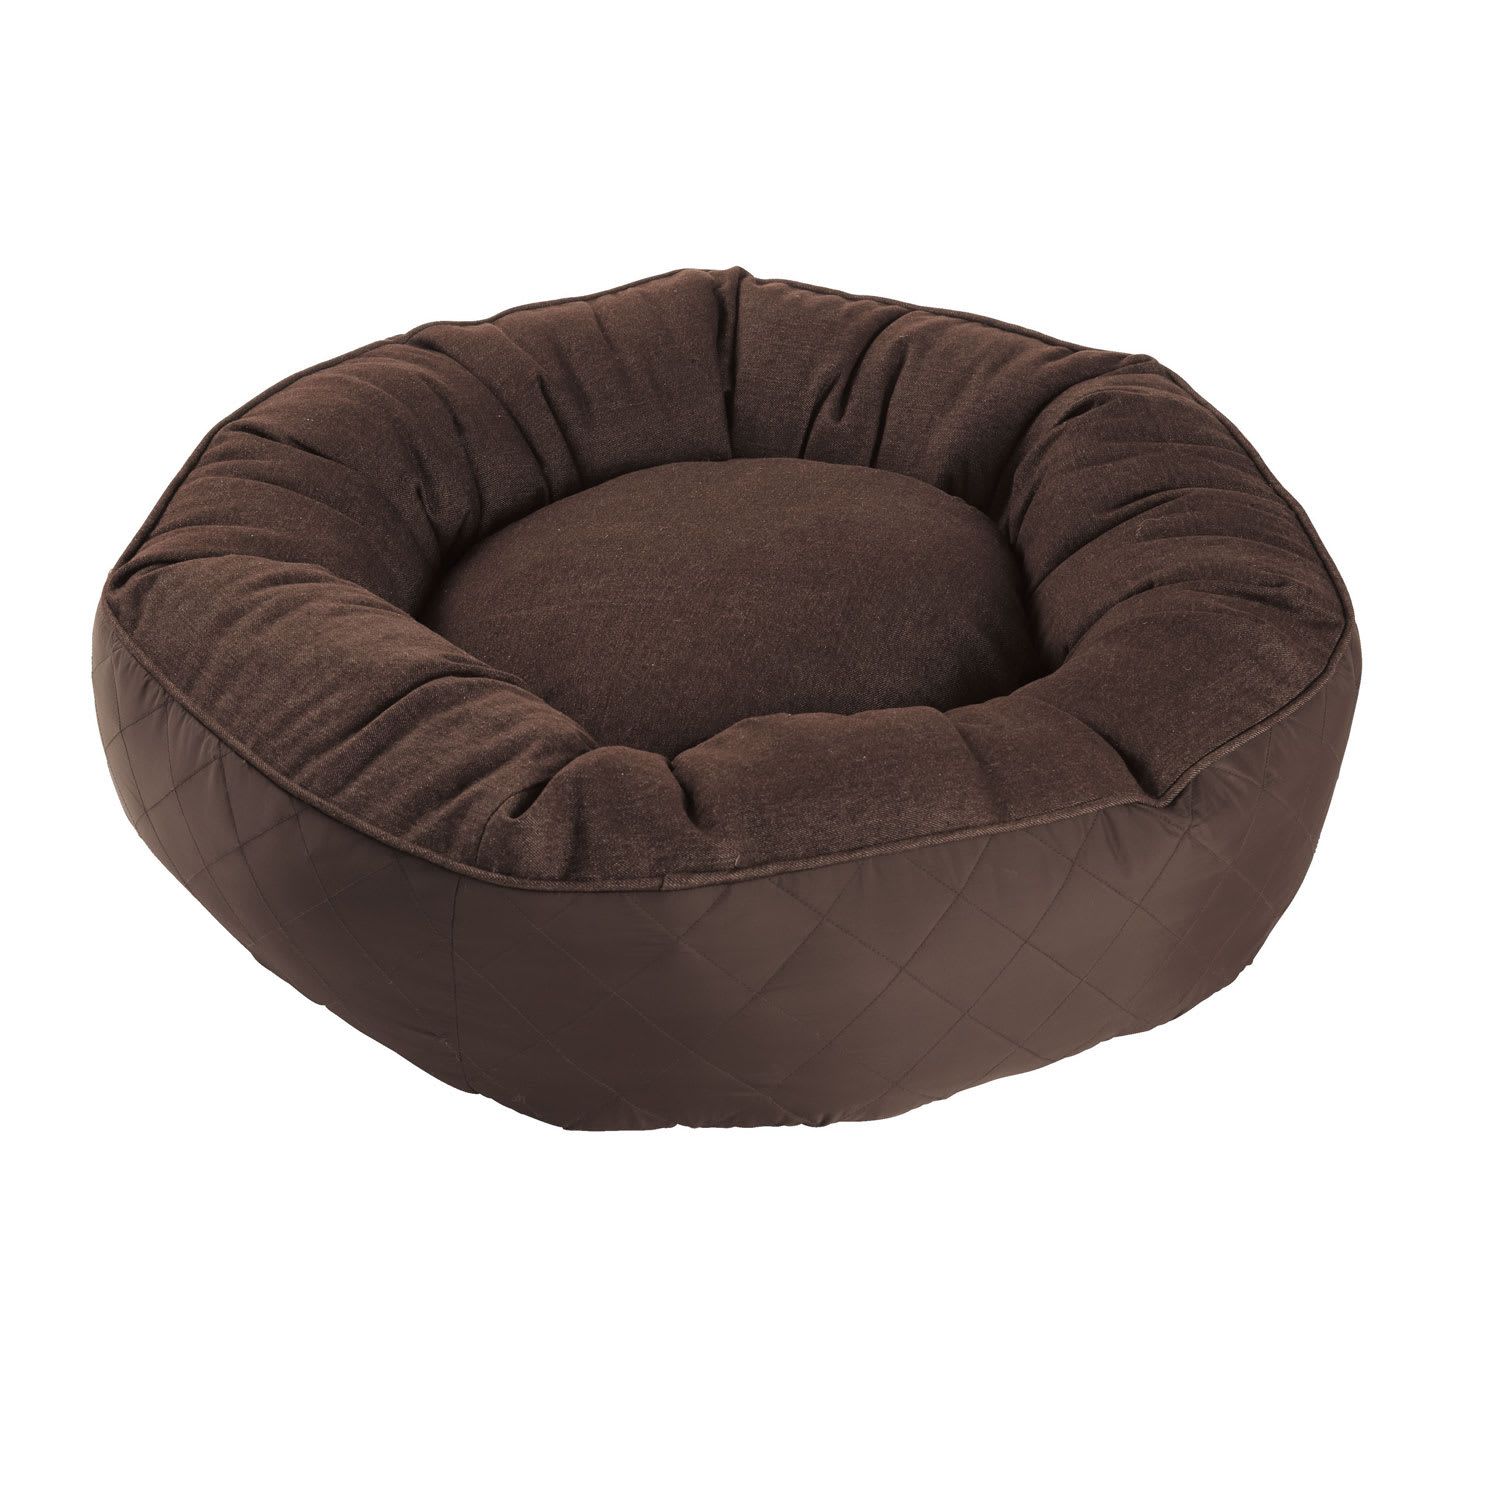 Solid Round Dog Beds – For Dogs Who Like To Curl - Brown